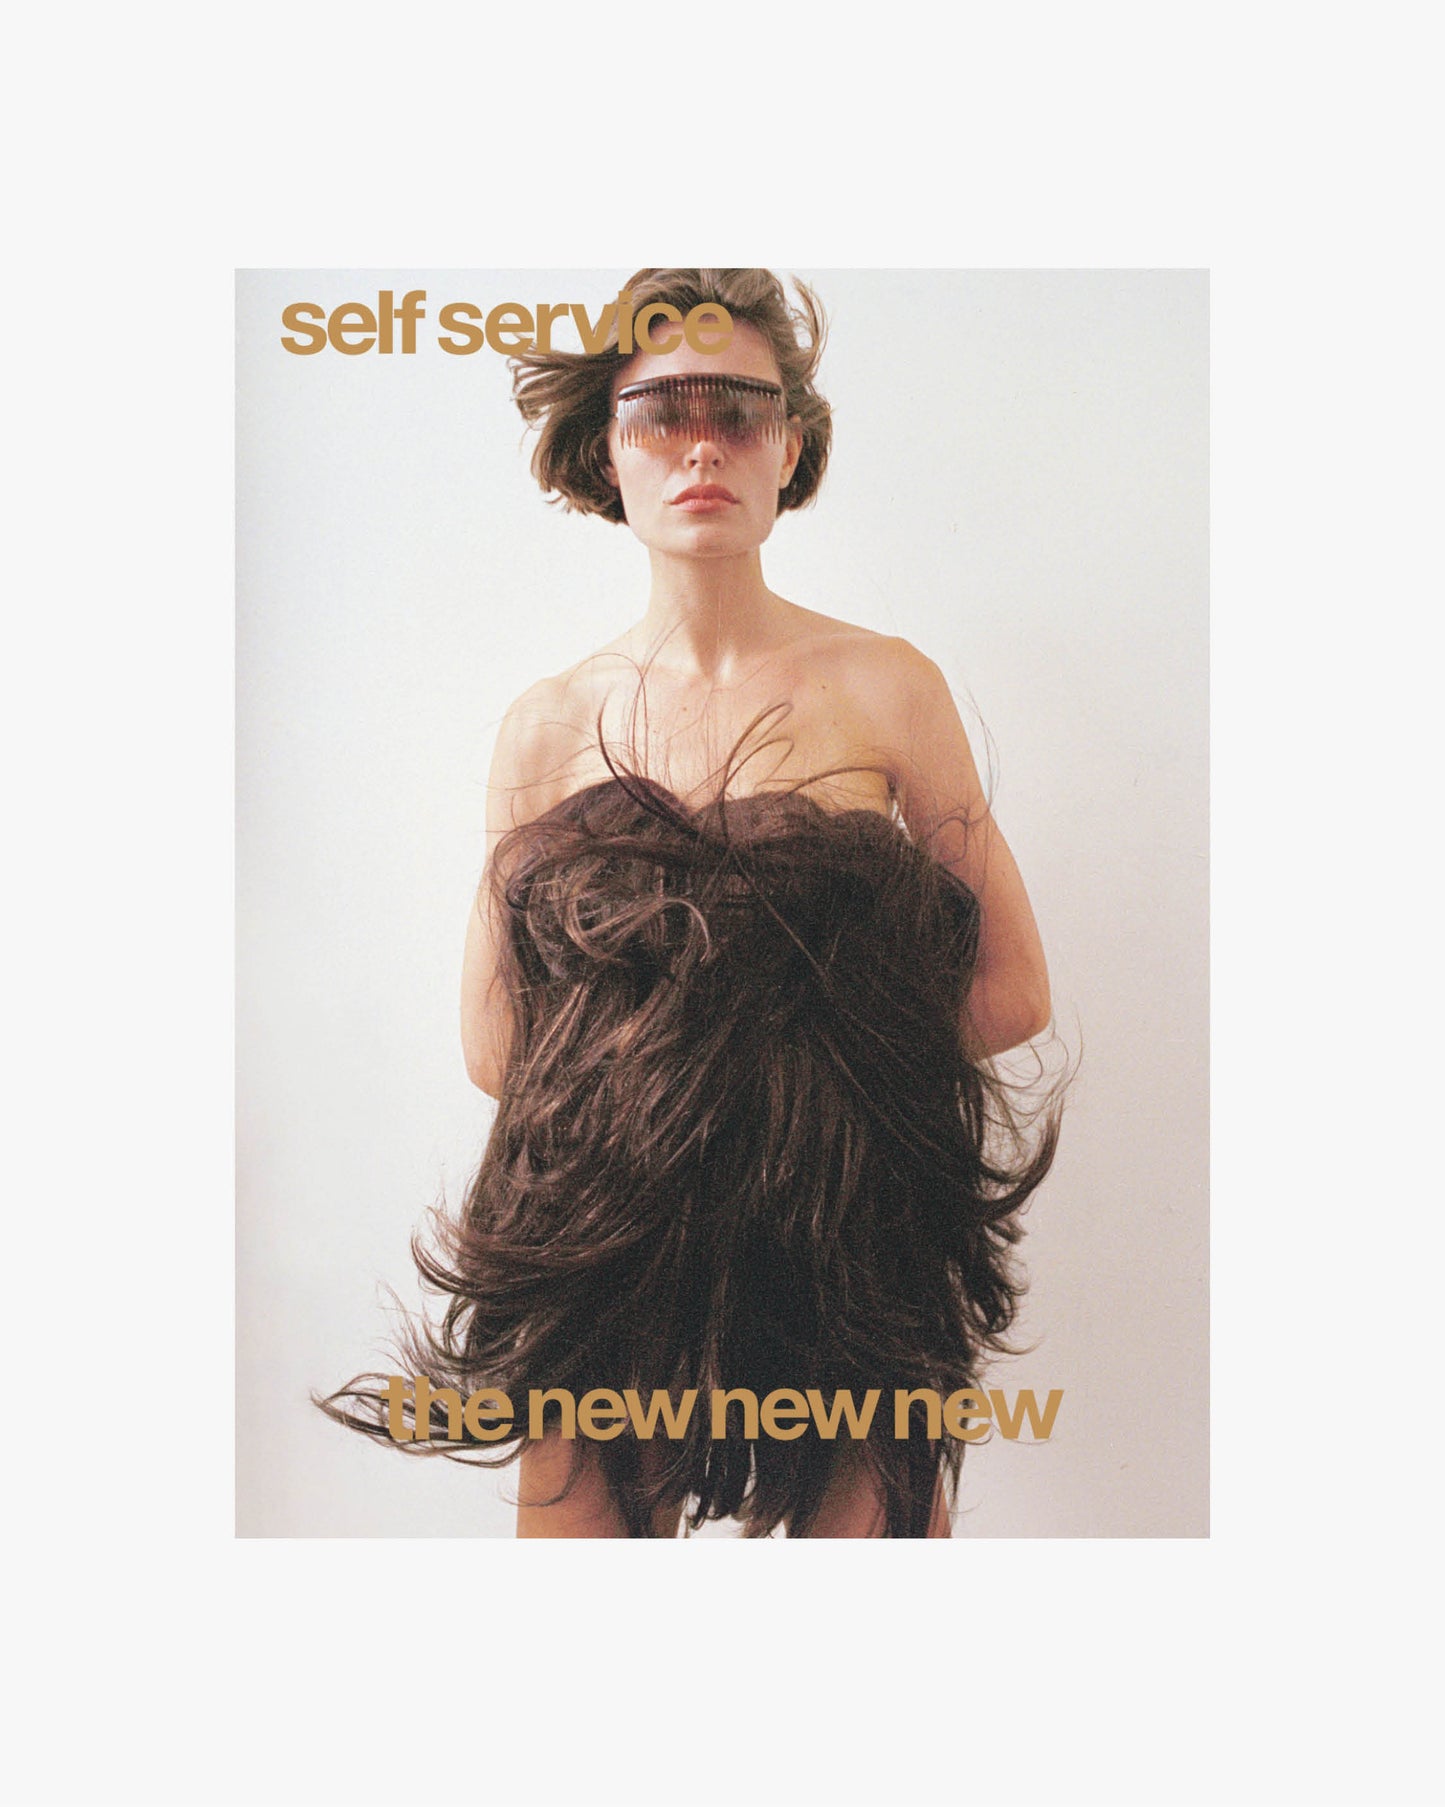 SELF SERVICE - Issue #60 - Cover 1 - The new new new